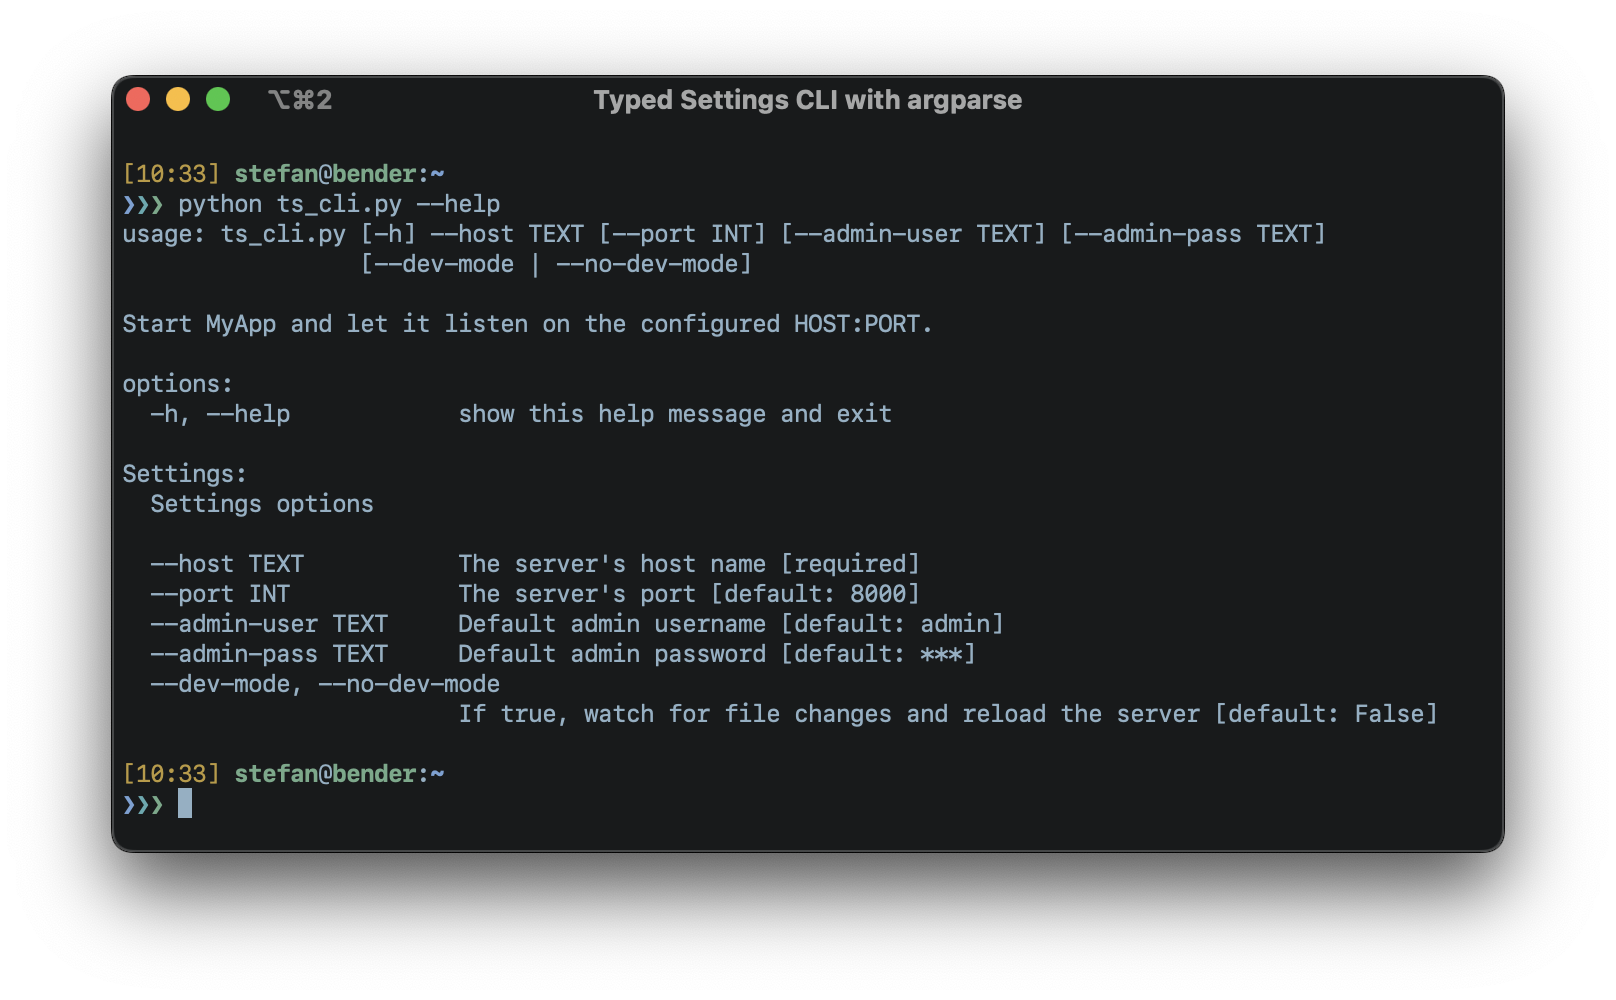 "--help" output of an "argparse" based Typed Settings CLI